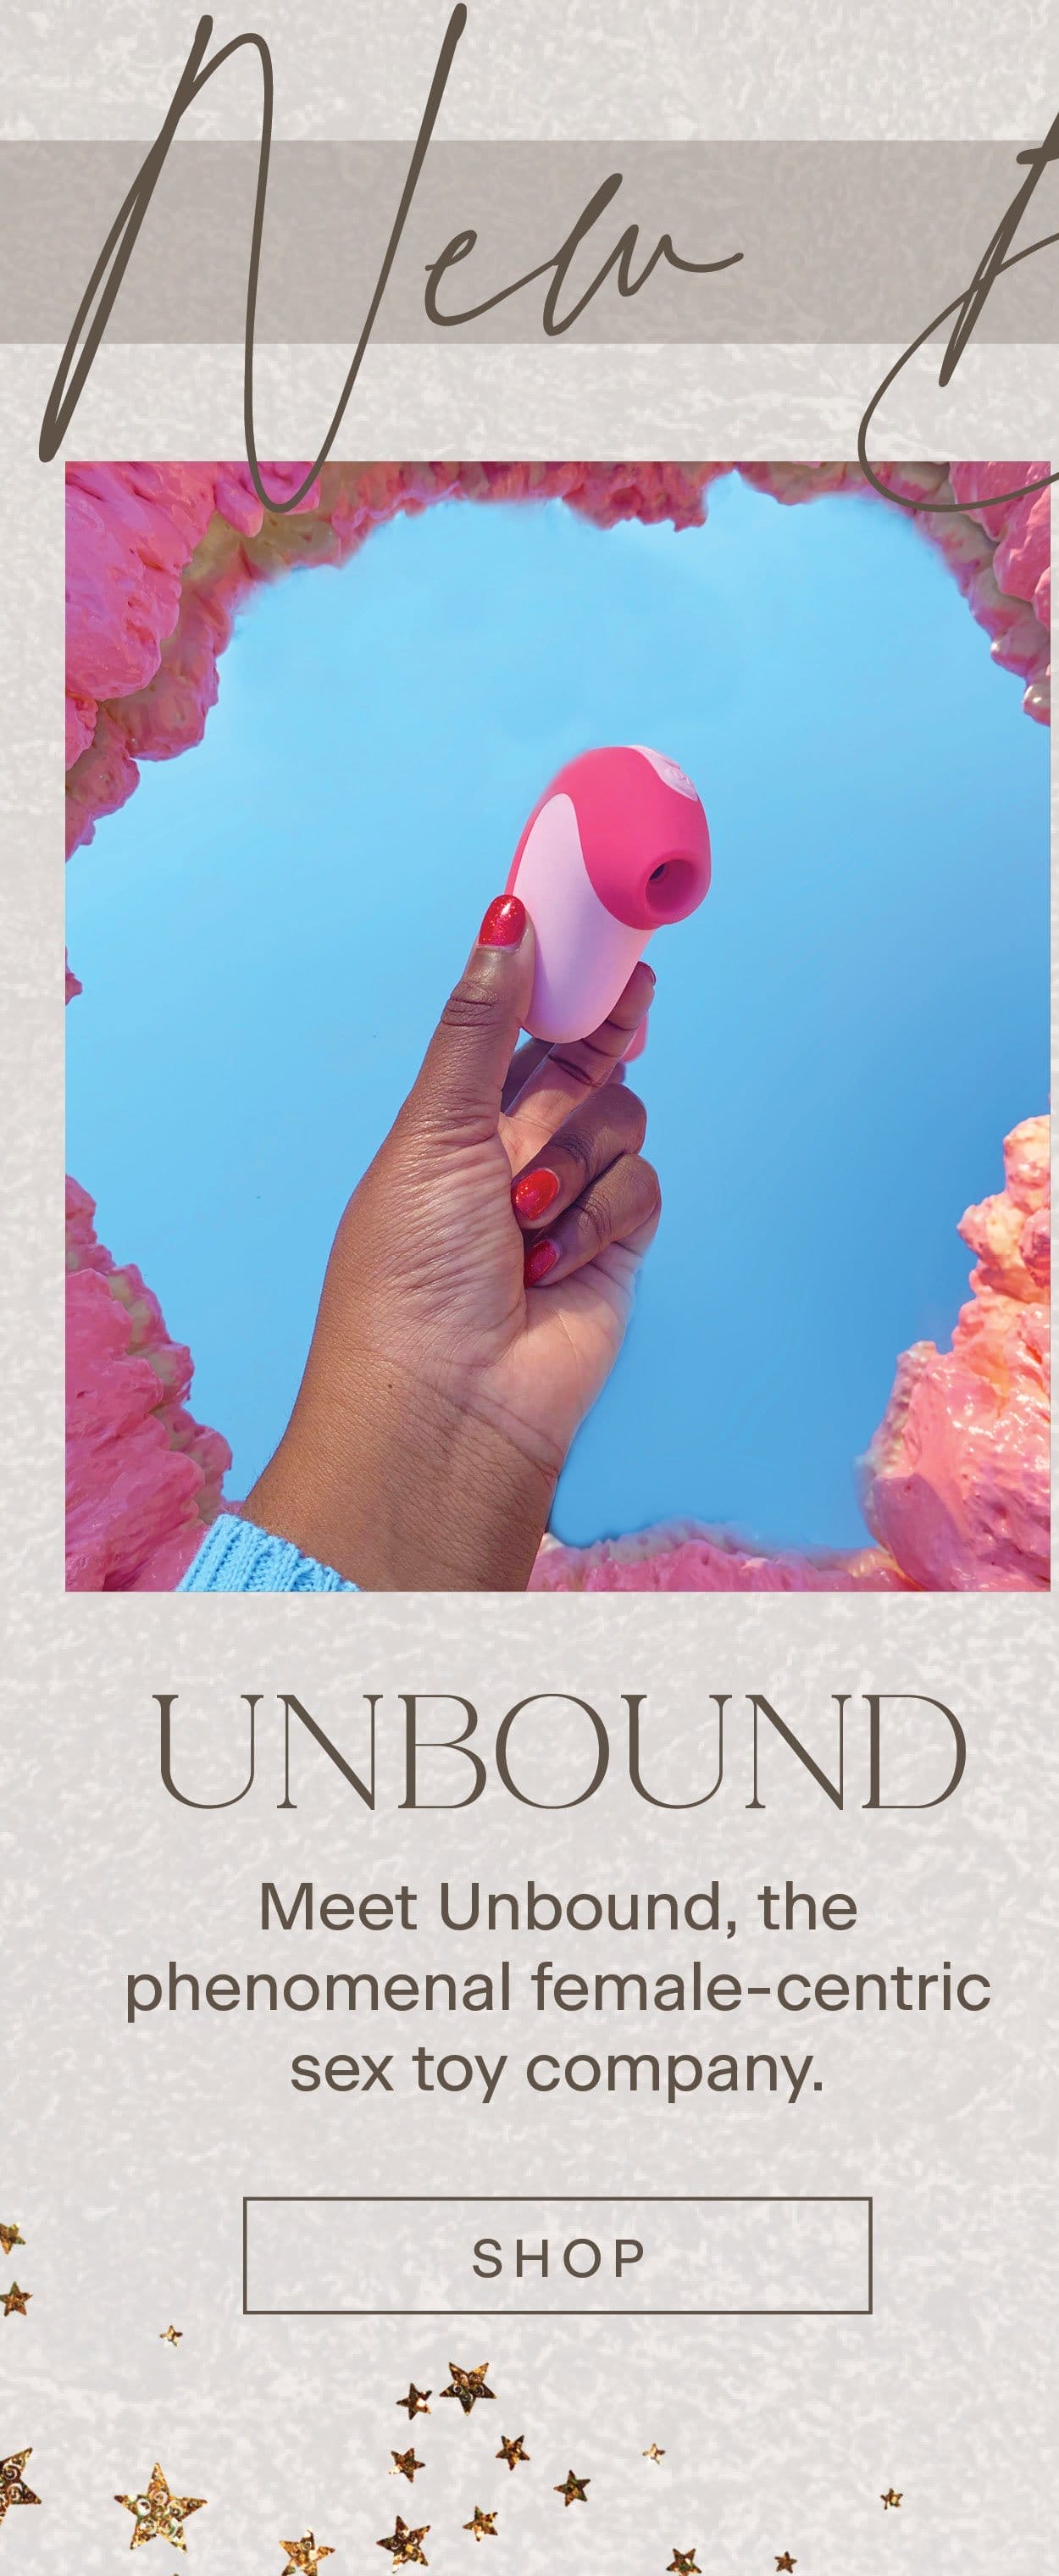 Meet Unbound, the phenomenal female-centric sex toy company.